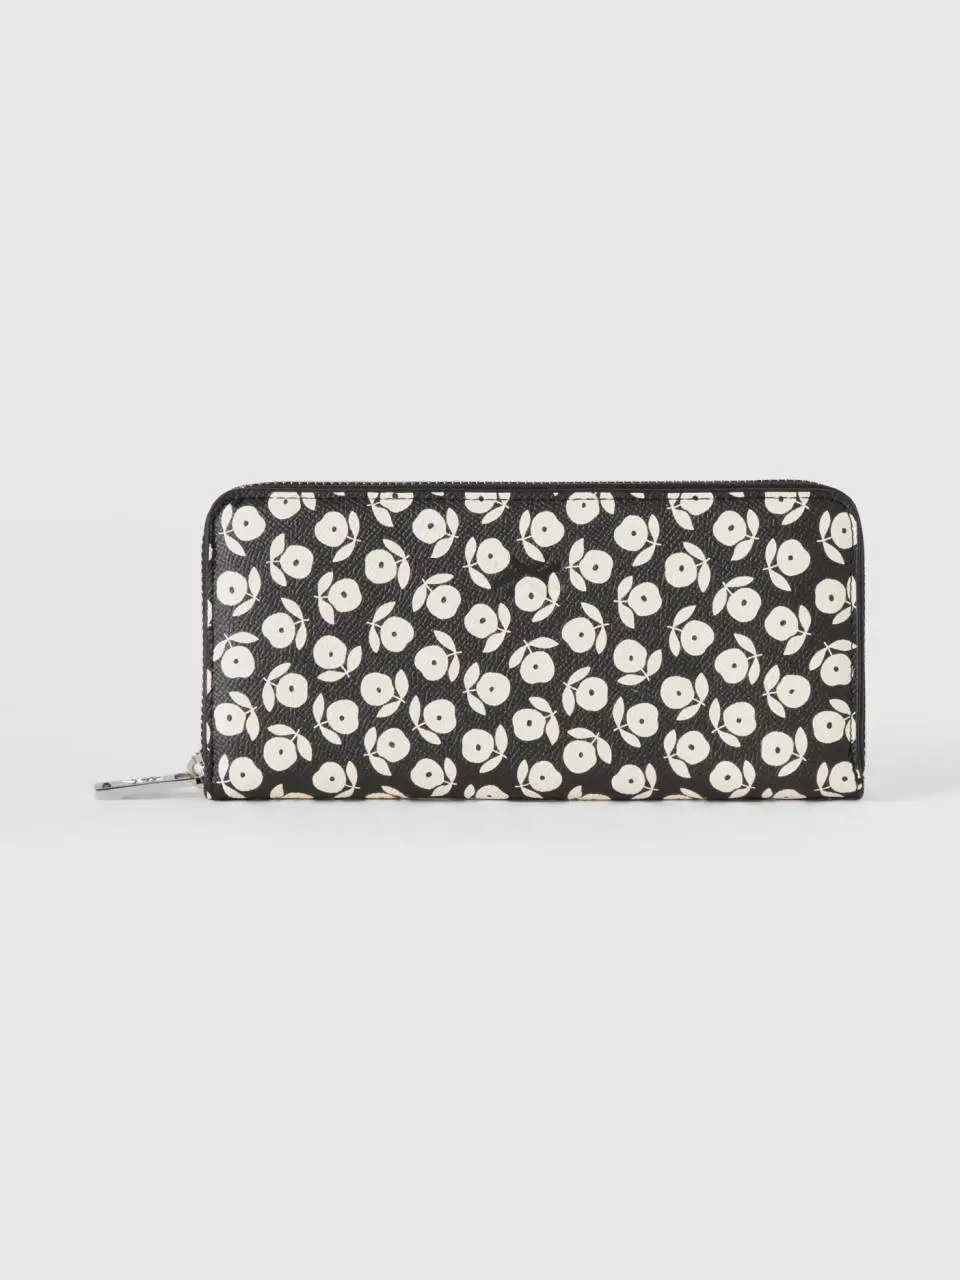 Benetton black wallet with white flowers. 1